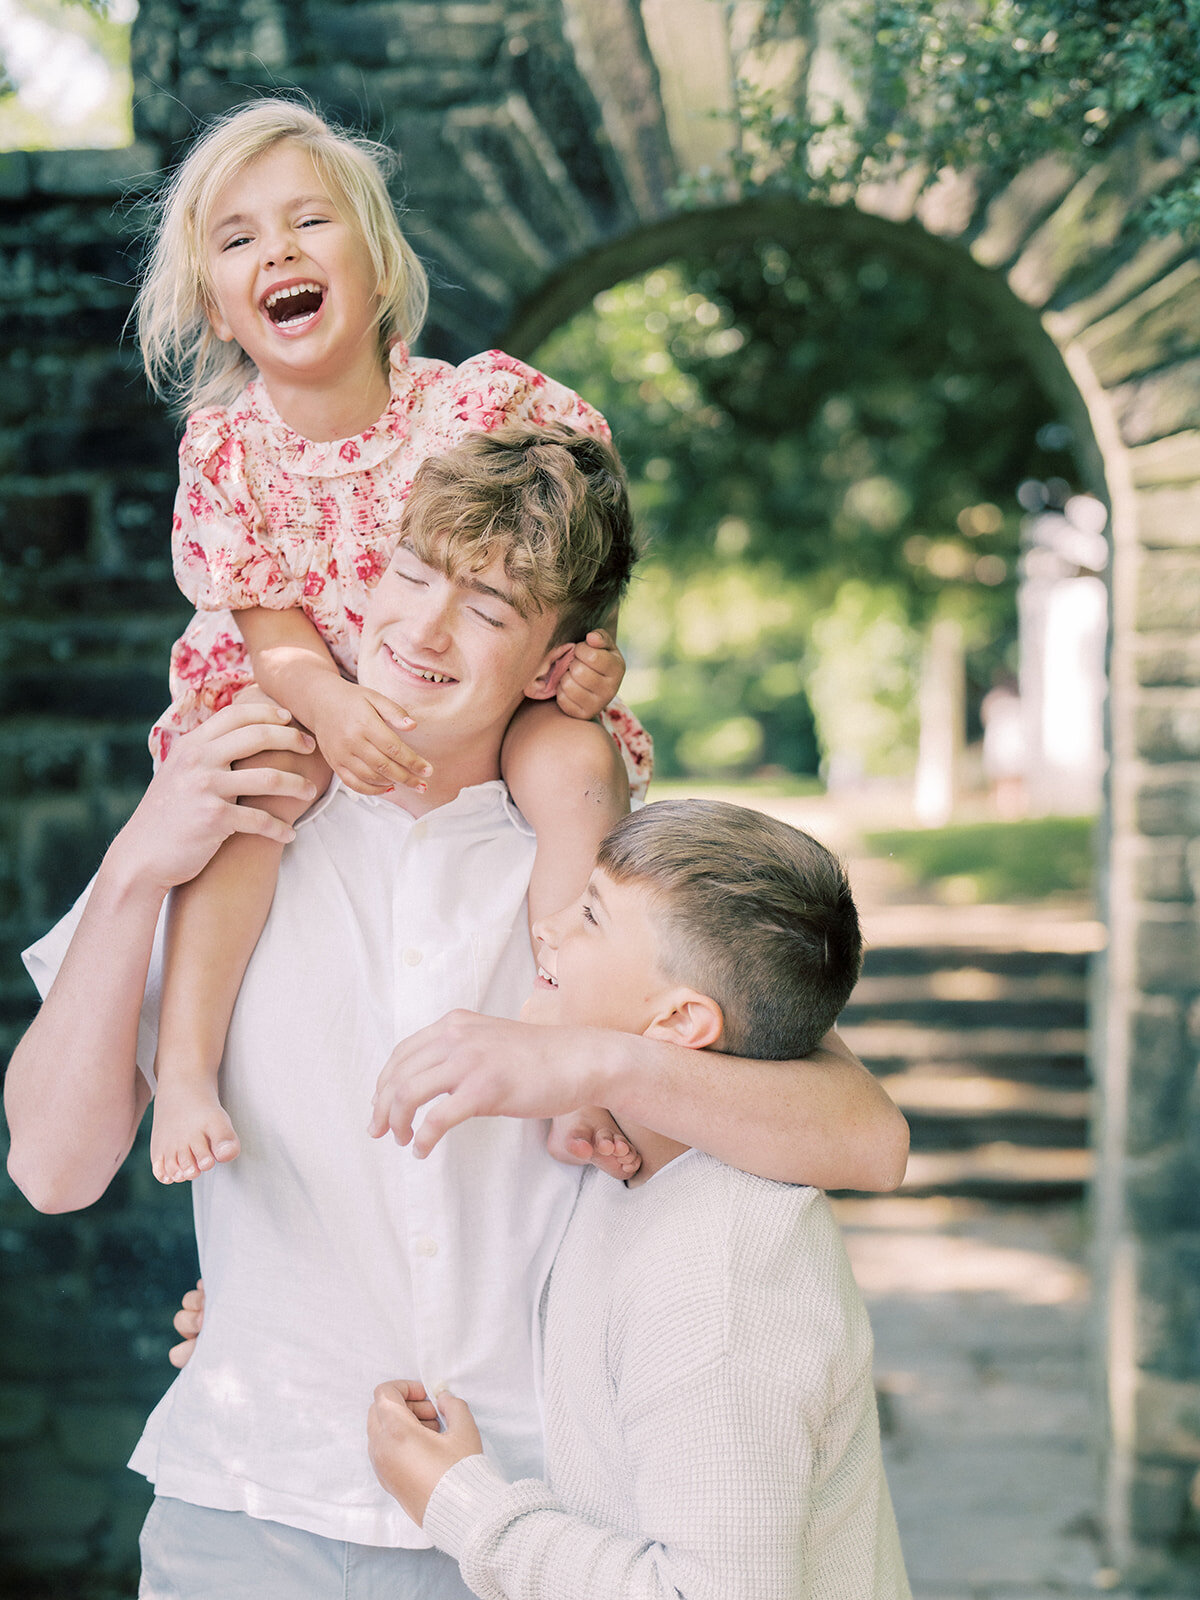 Little girl sits on her big brother's shoulders and laughs as a younger brothers hugs the bigger brother, too.